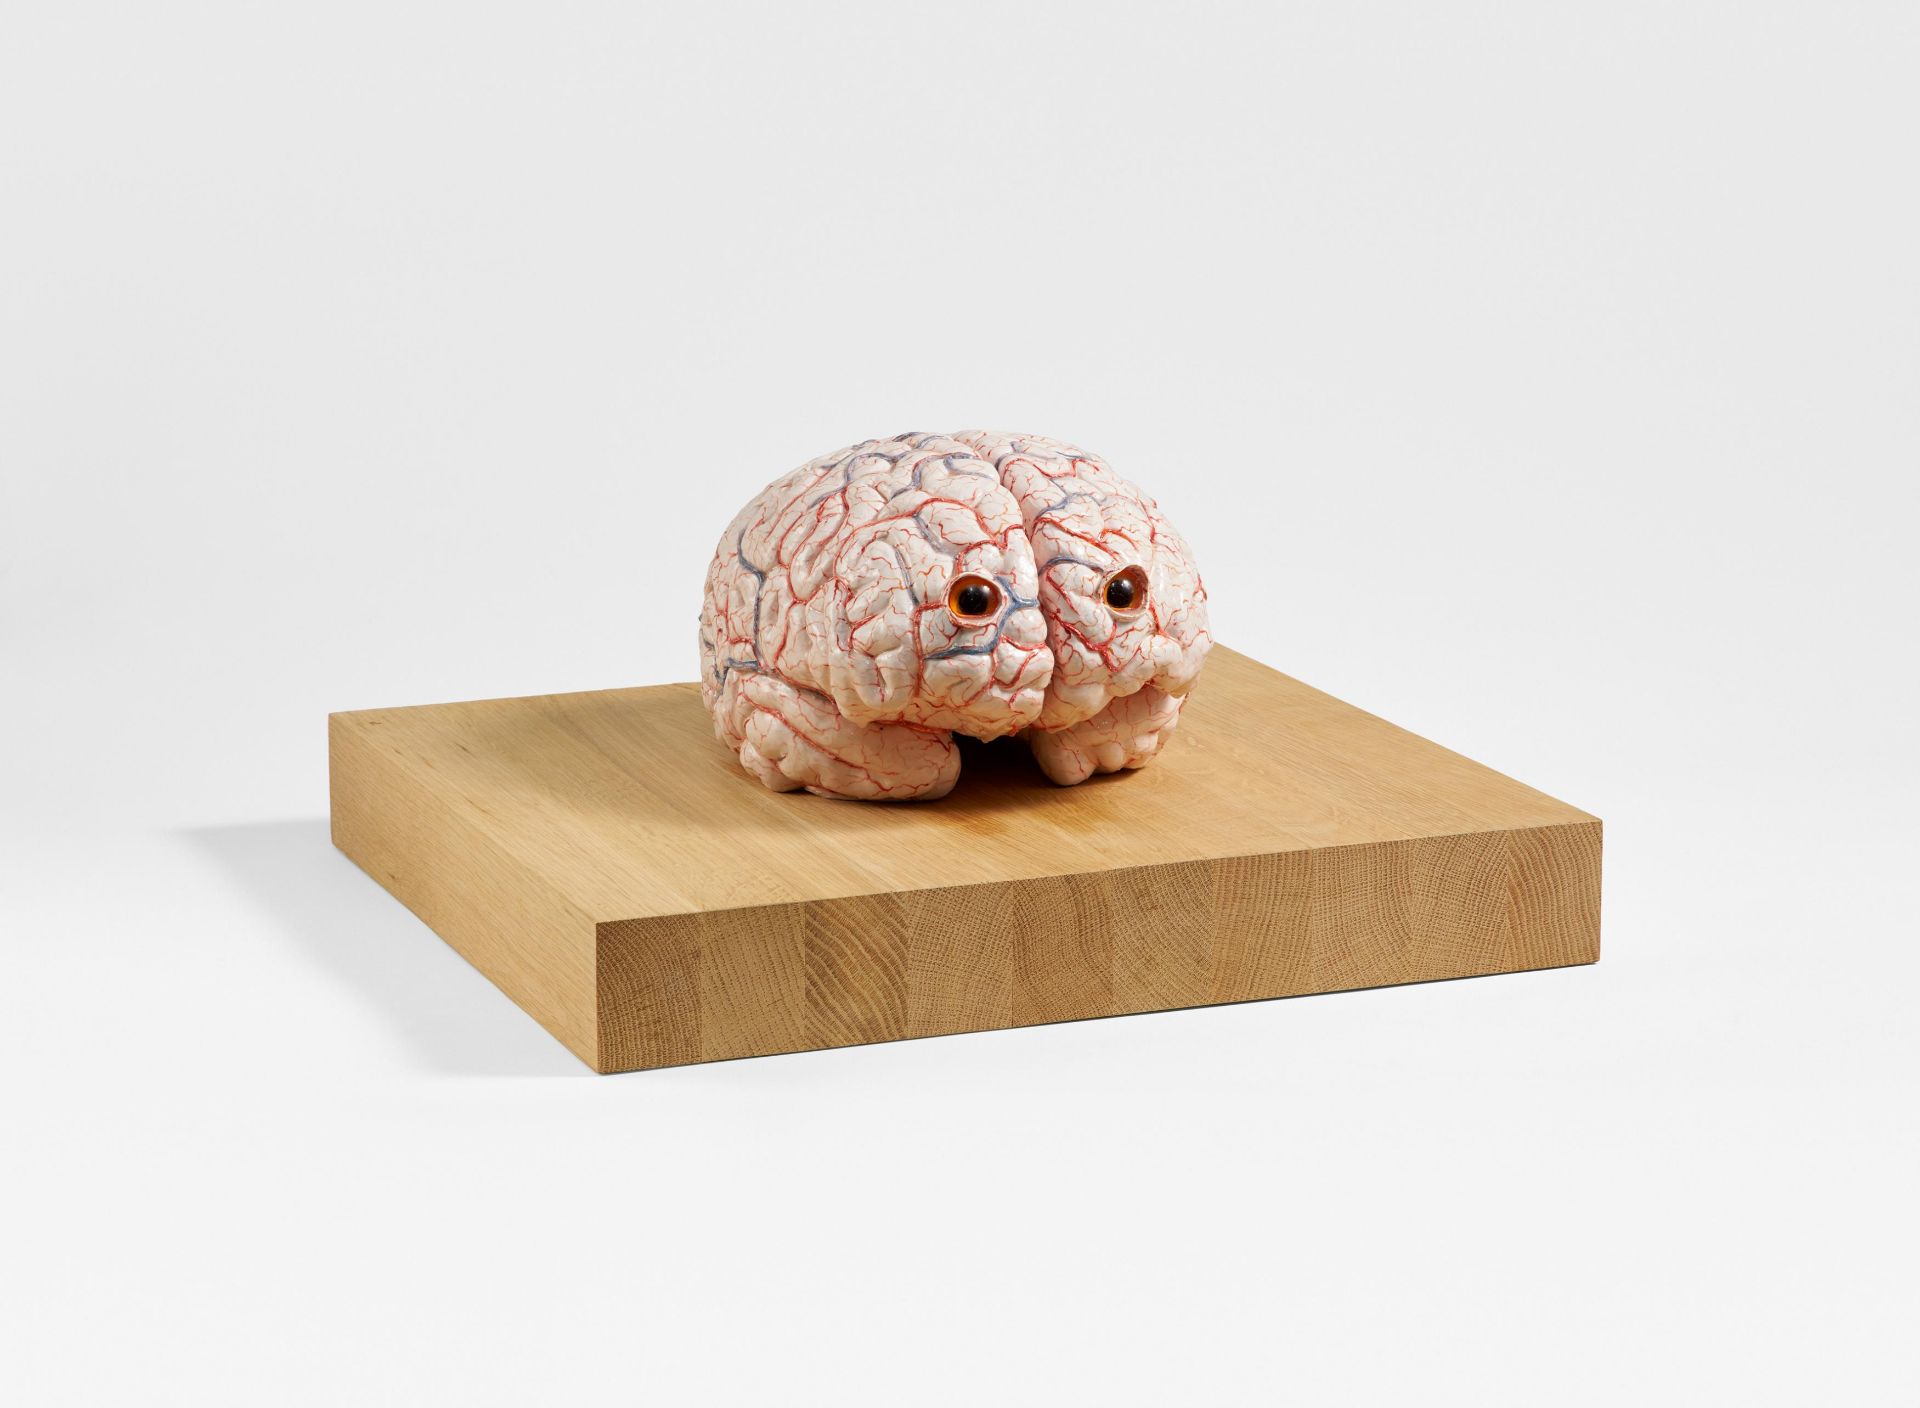 Jan Fabre: The Brain of a Messenger of COLth